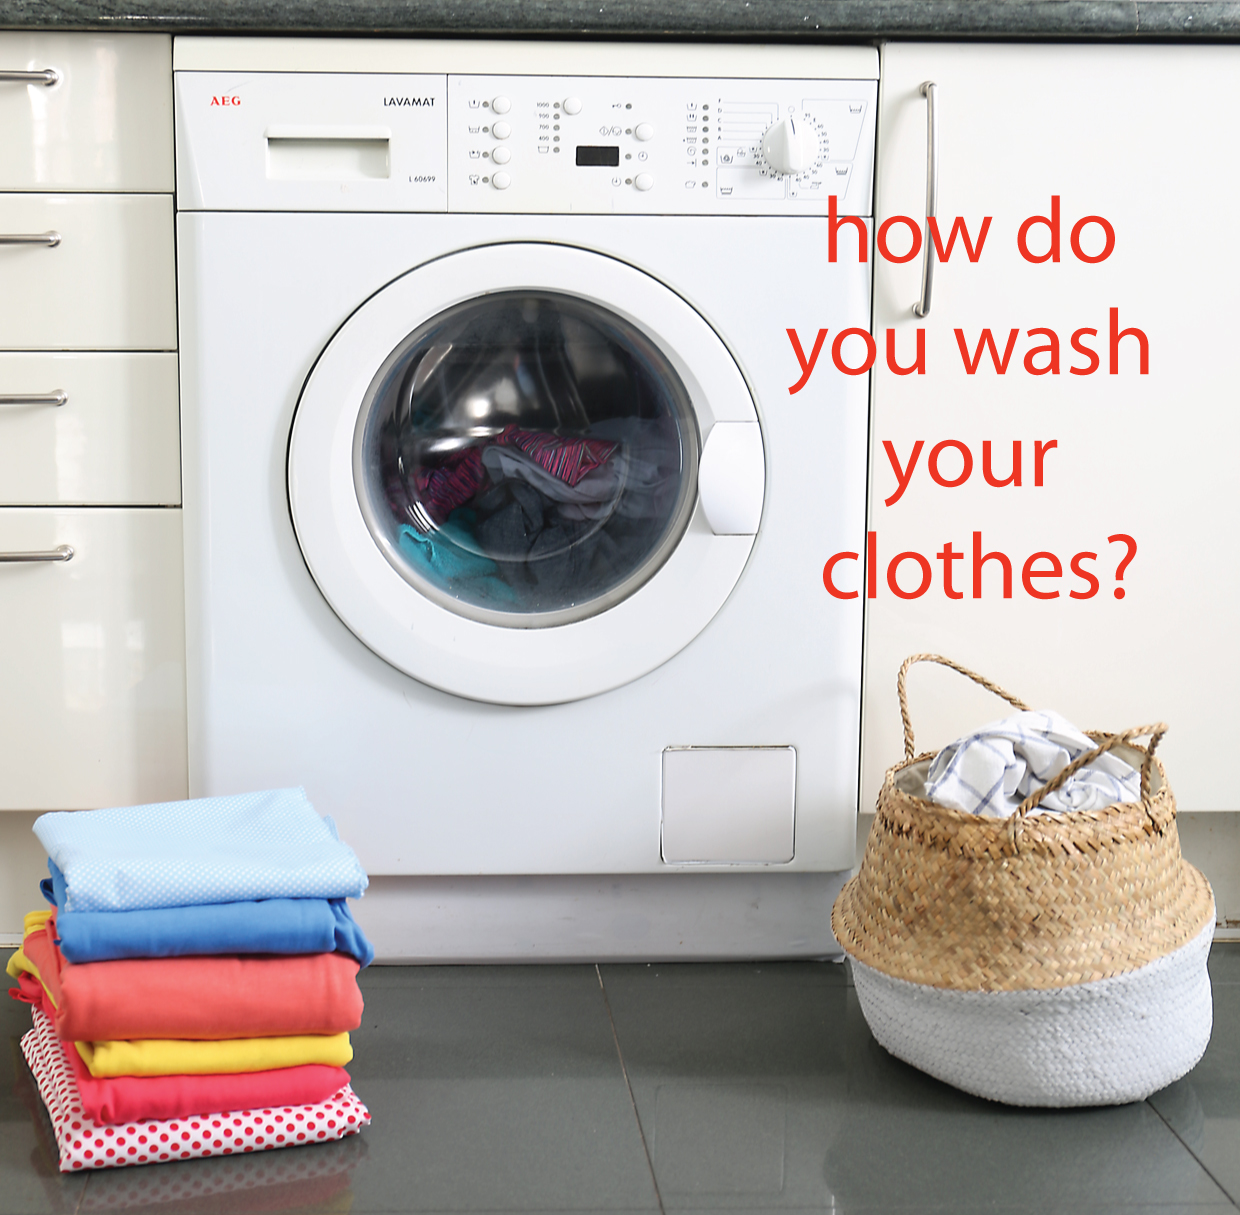 wash your clothes